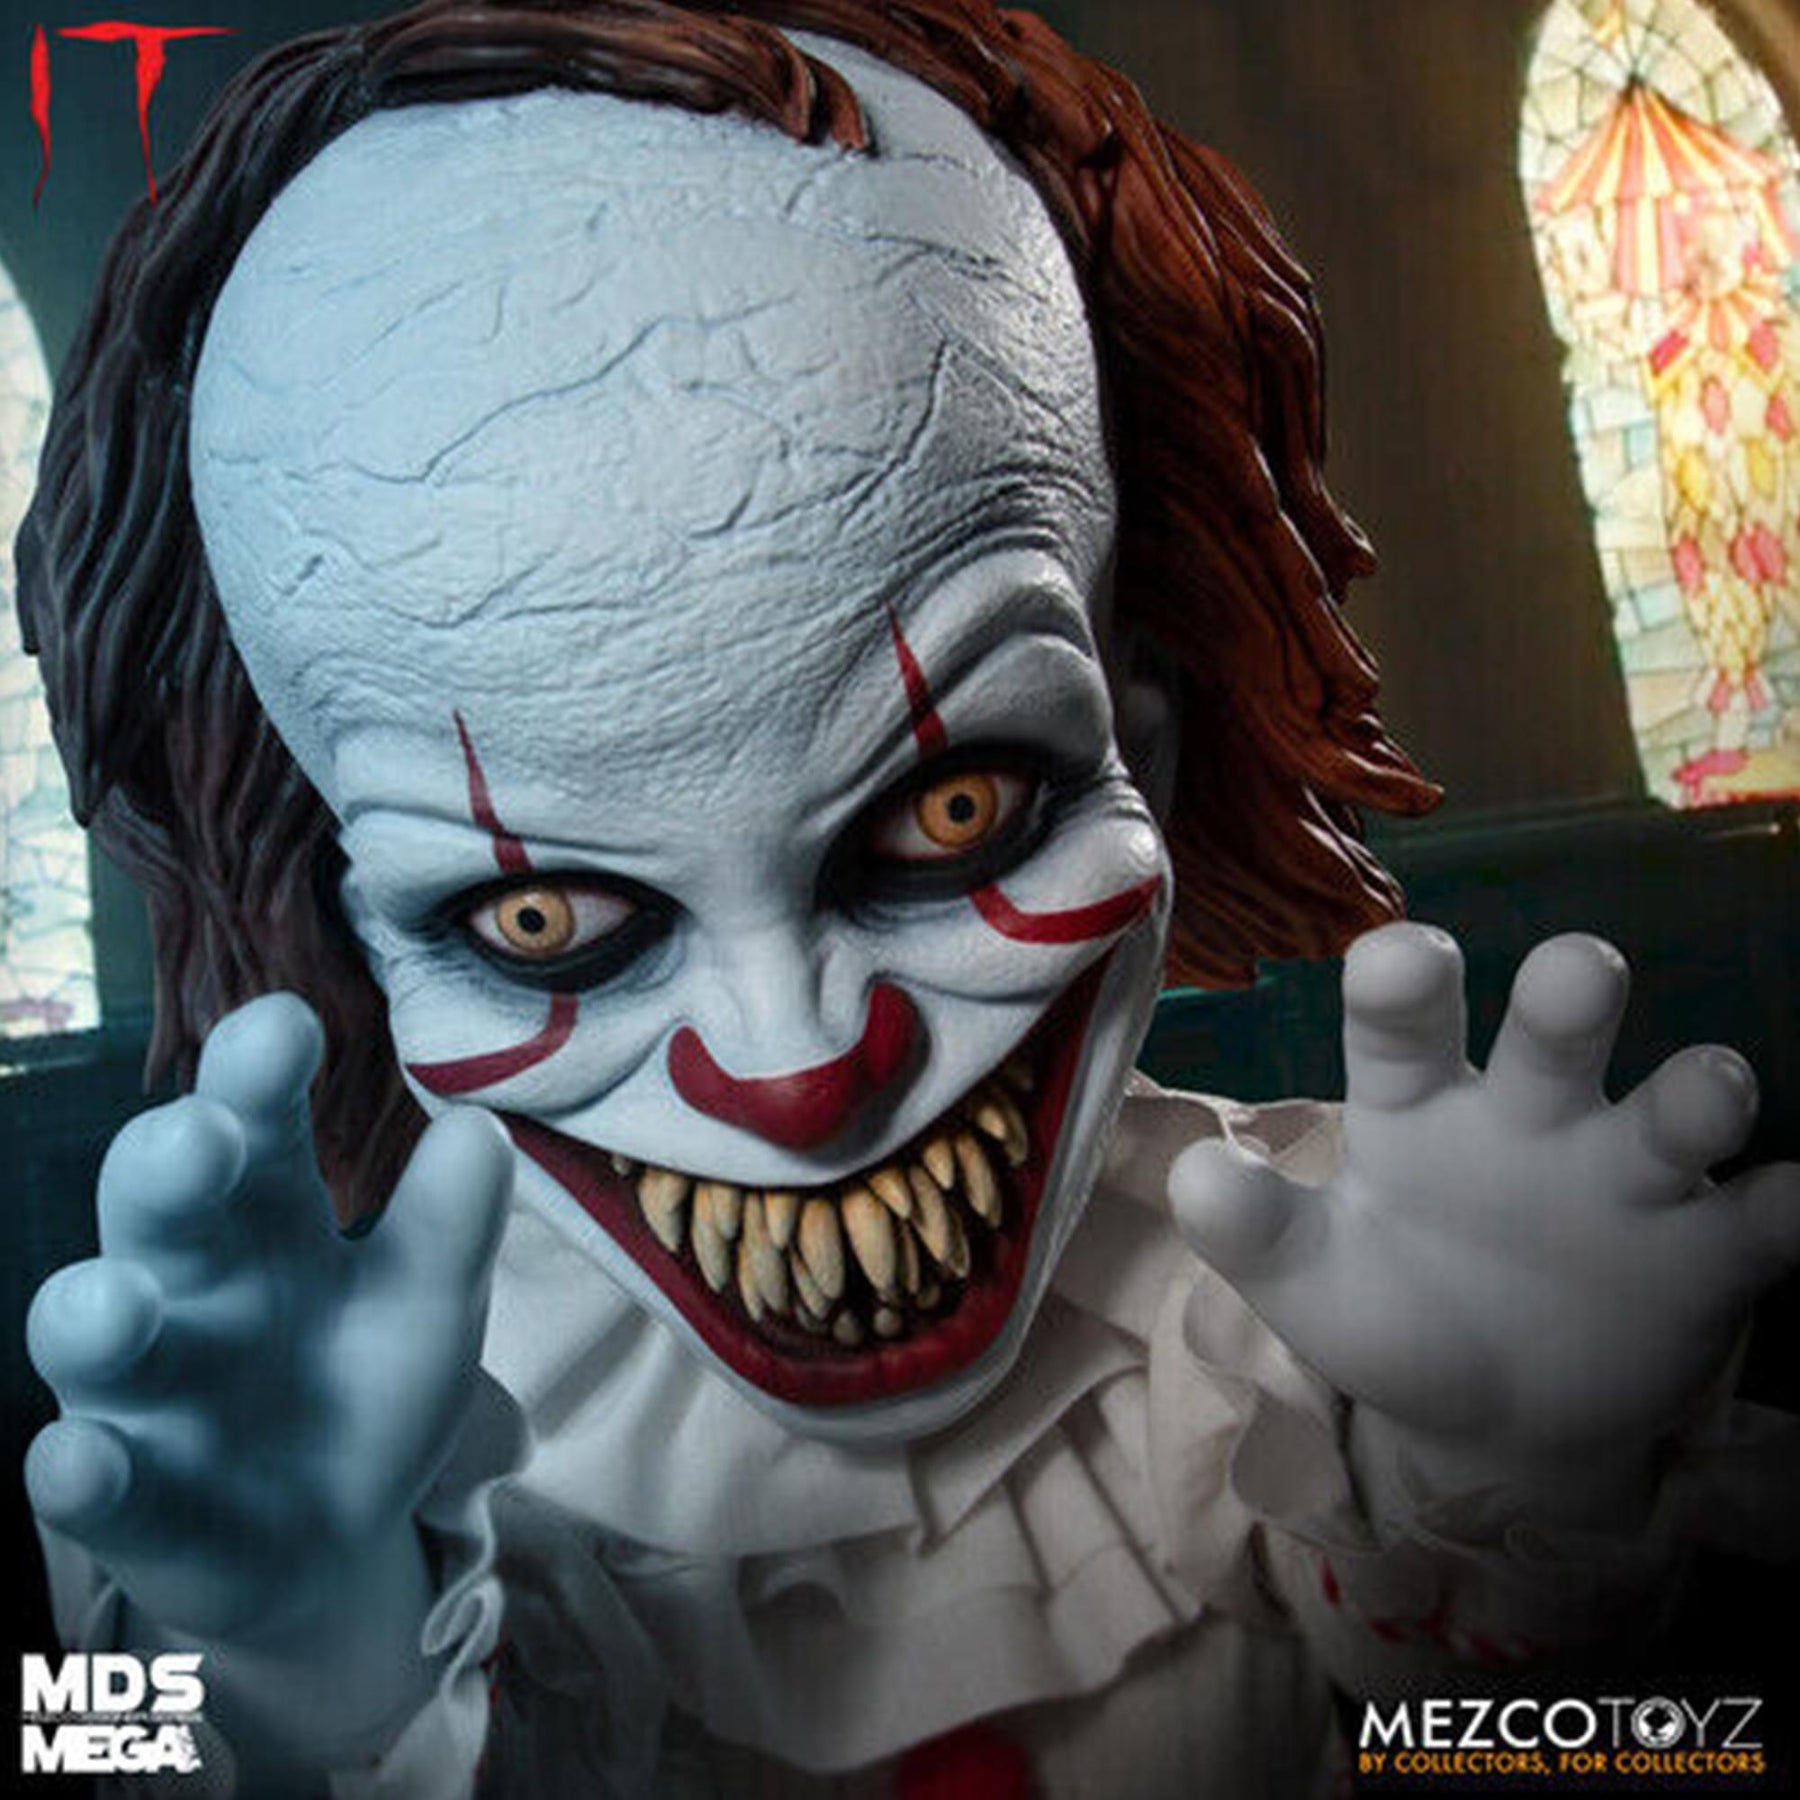 MDS Mega Scale IT: Talking Sinister Pennywise